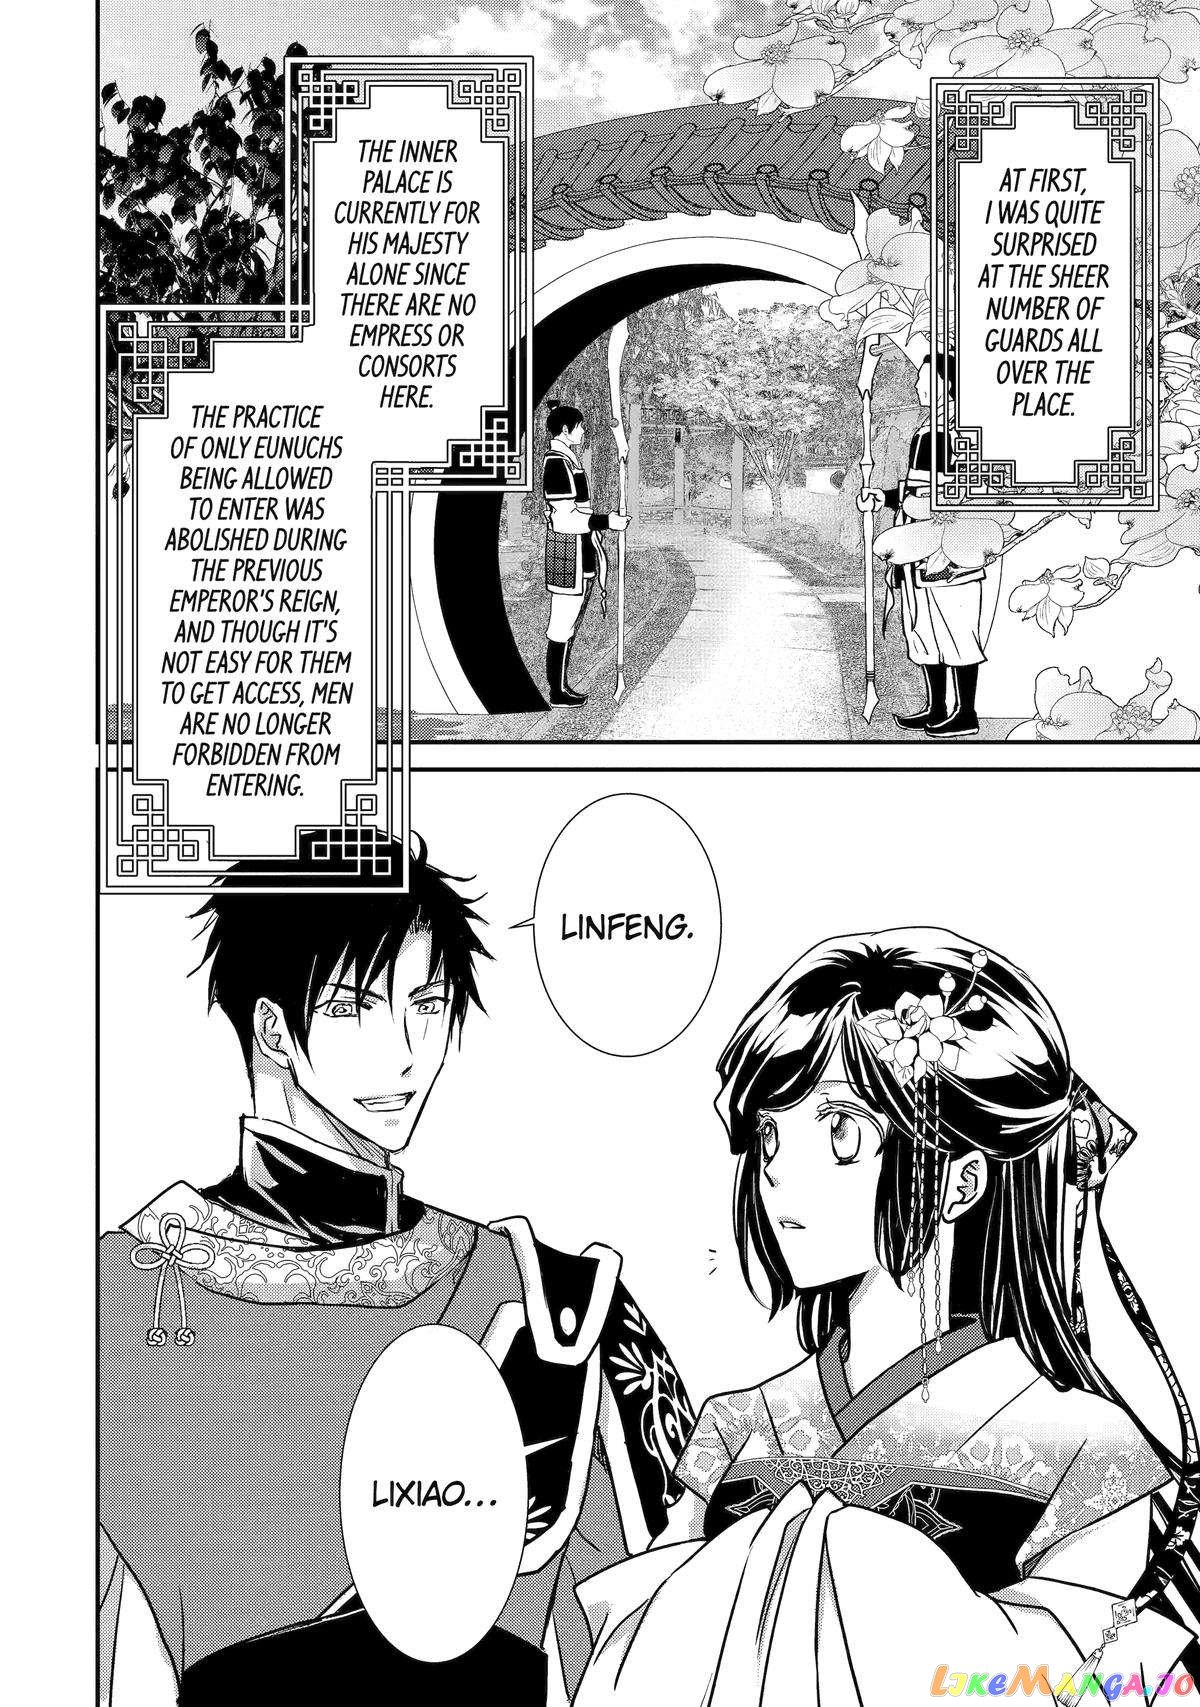 The Emperor's Caretaker: I'm Too Happy Living as a Lady-in-Waiting to Leave the Palace chapter 8 - page 10